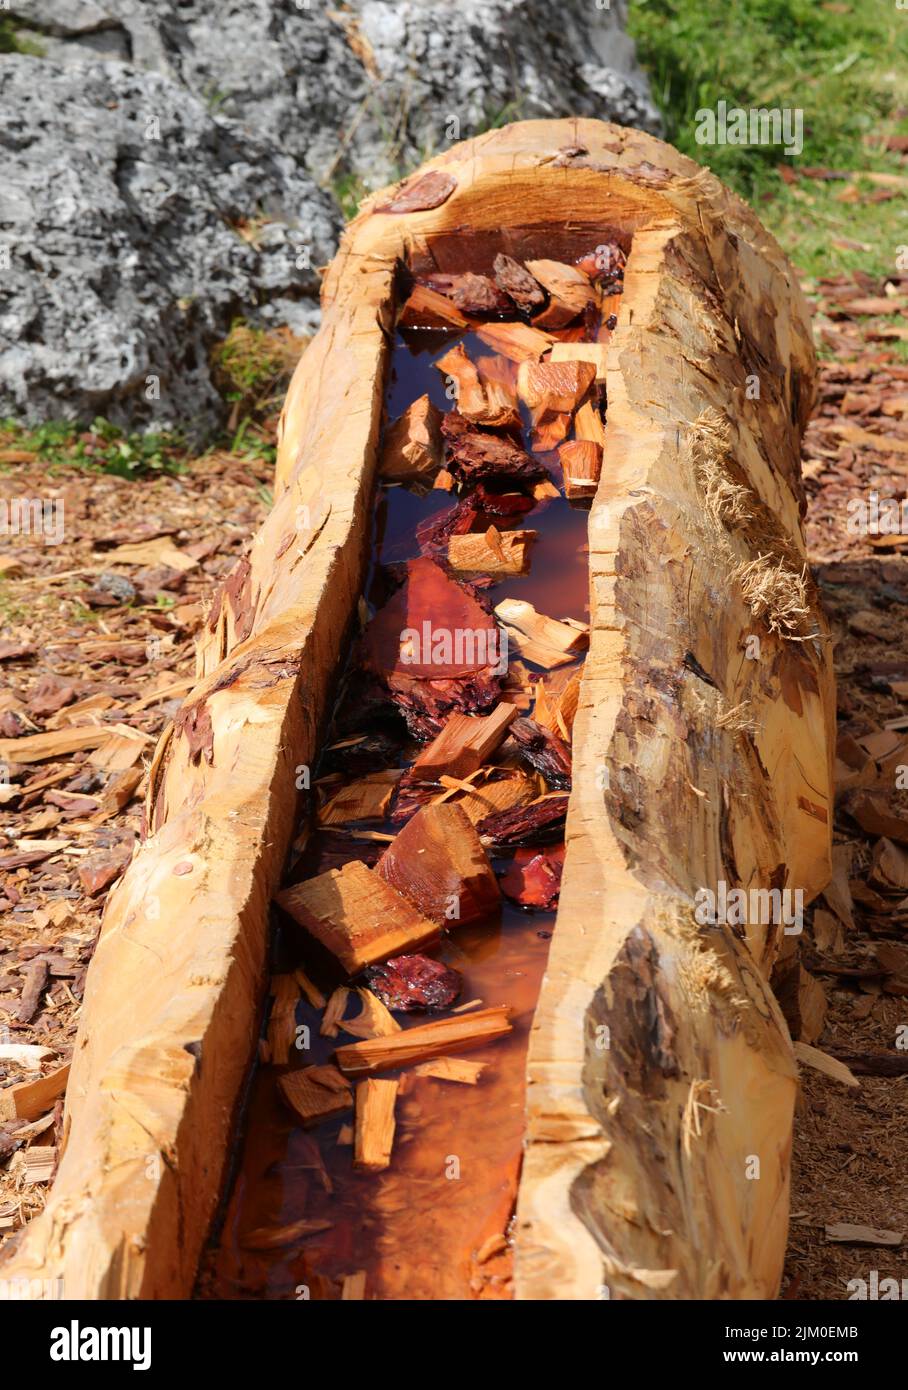 trunk of a tree hollowed out by the craftsman to create a natural planter in the mountains with water to soften the wood Stock Photo